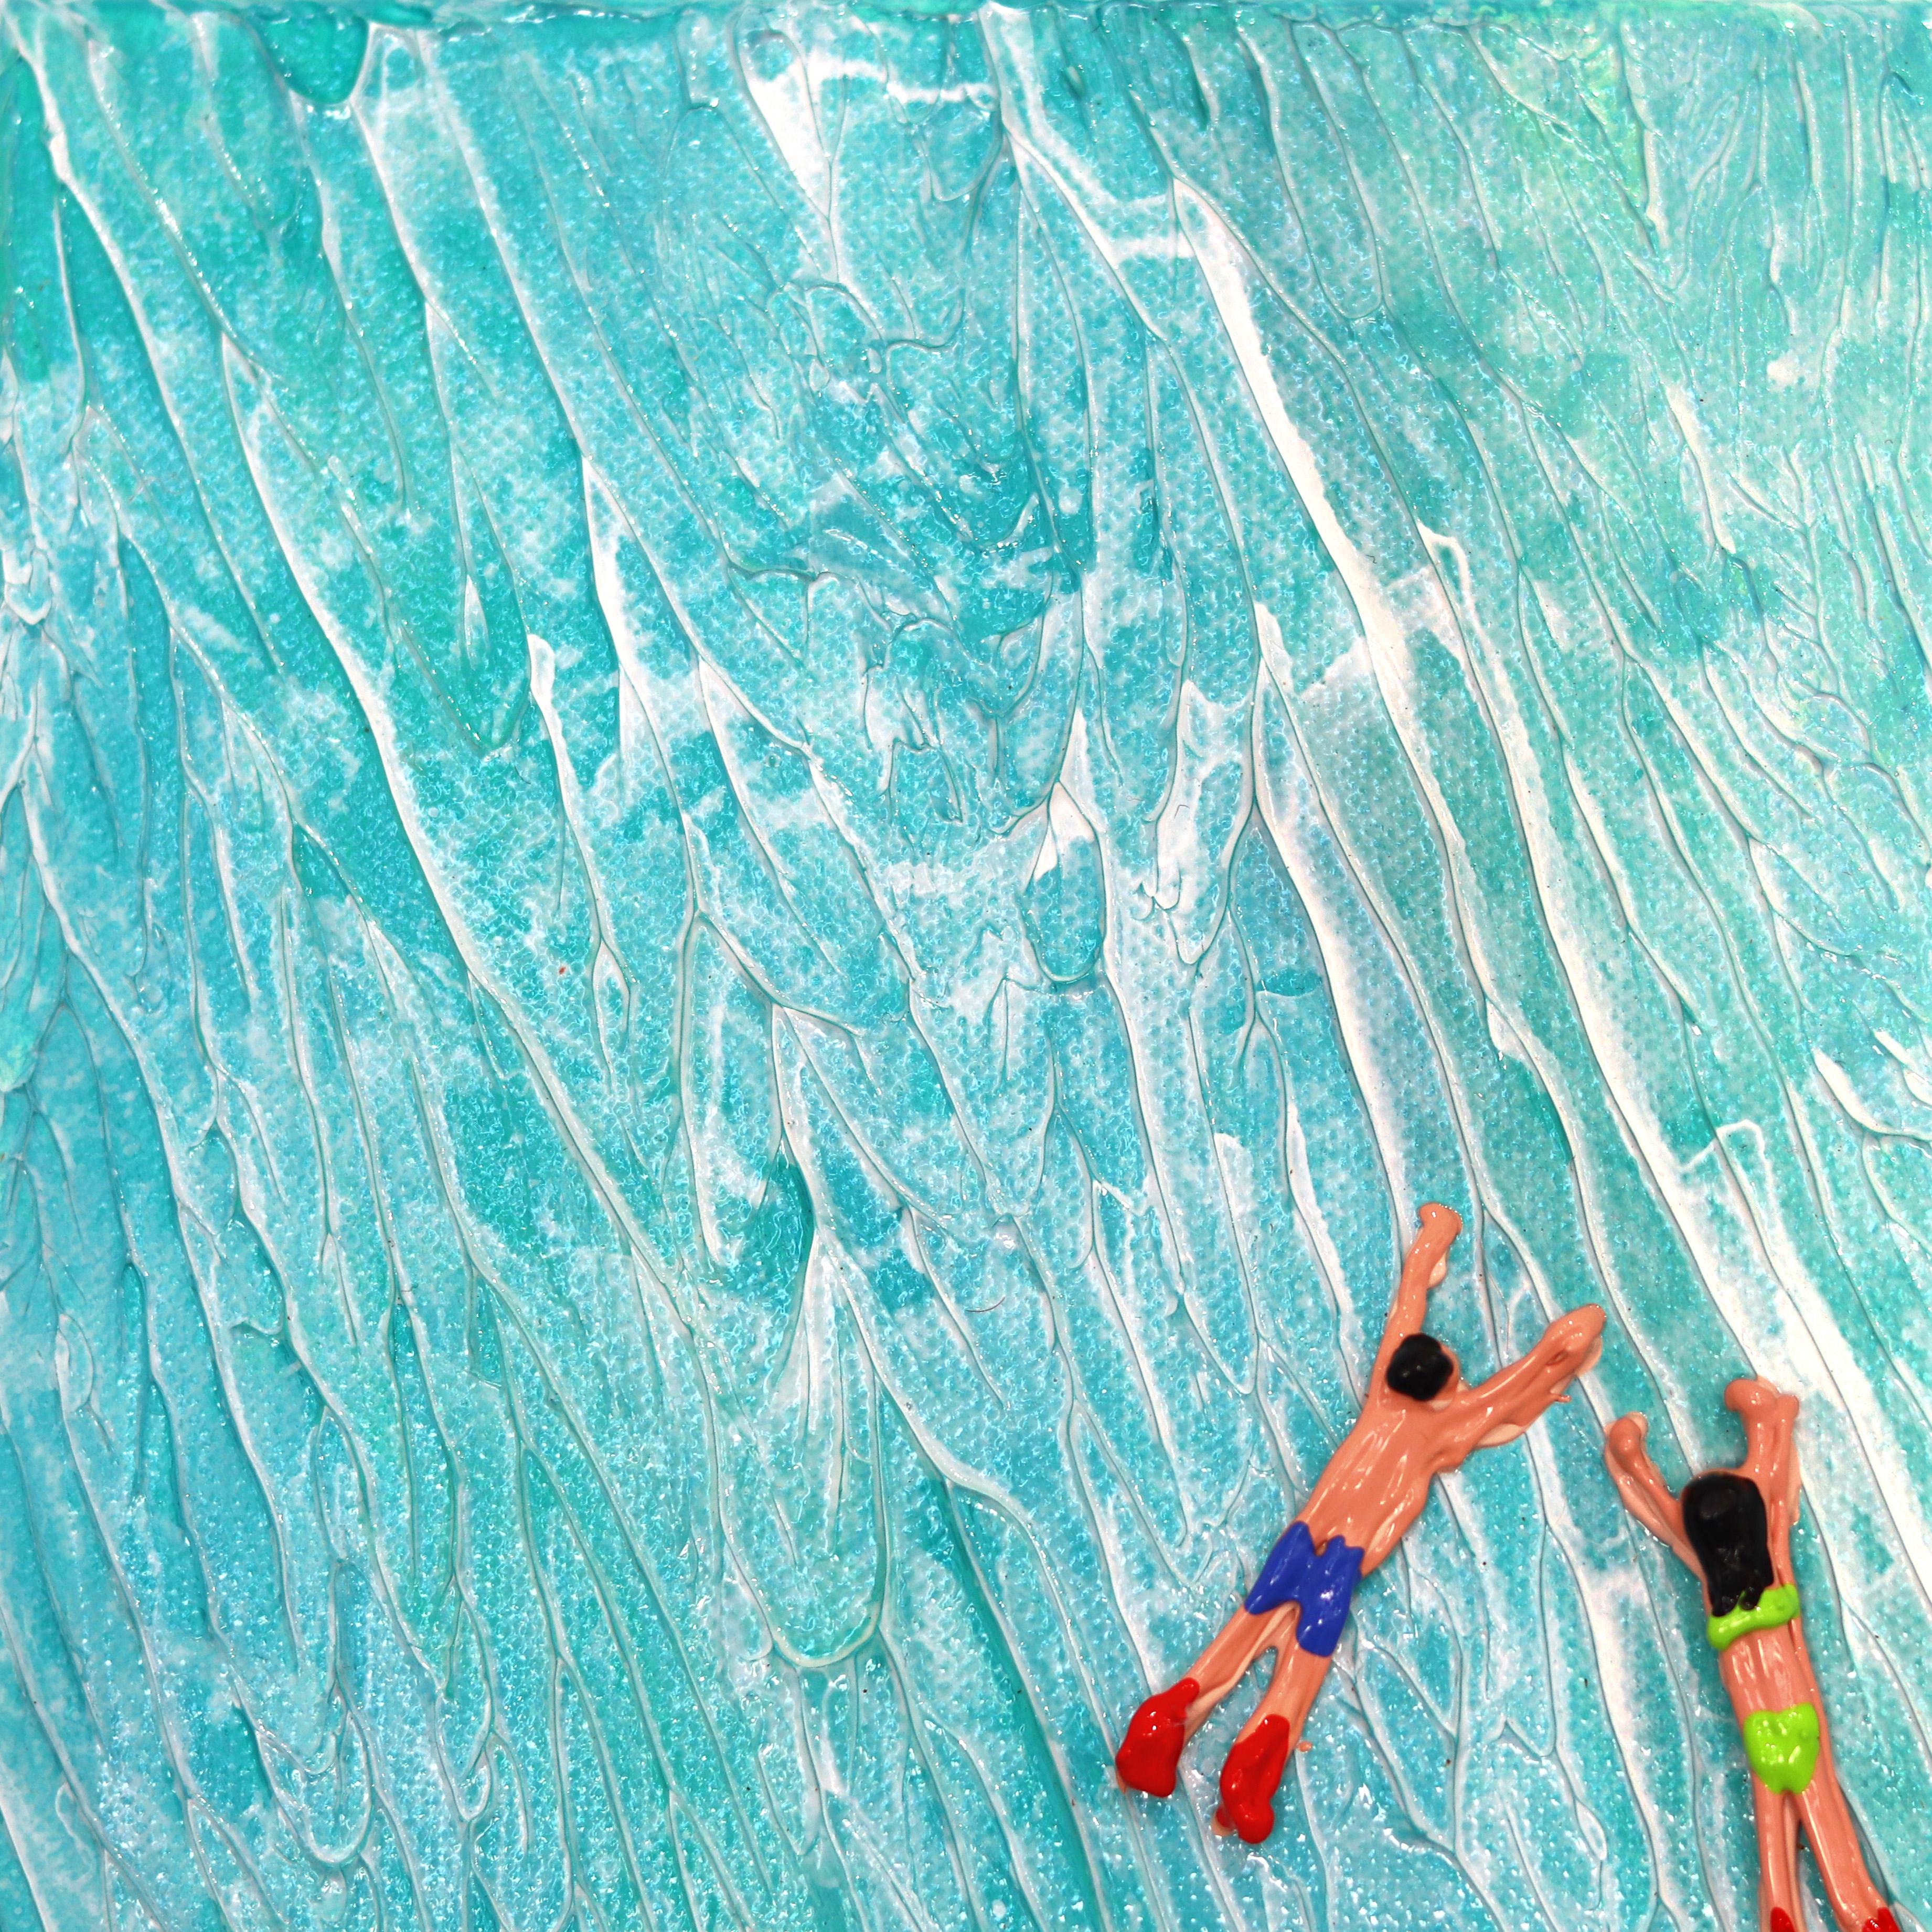 The textural aerial ocean and beach scene paintings of Elizabeth Langreiter are a delightful escape from reality into a playful and joyful world. Her mixed-media art often evokes the viewer to experience happy flashbacks to a favorite time or place